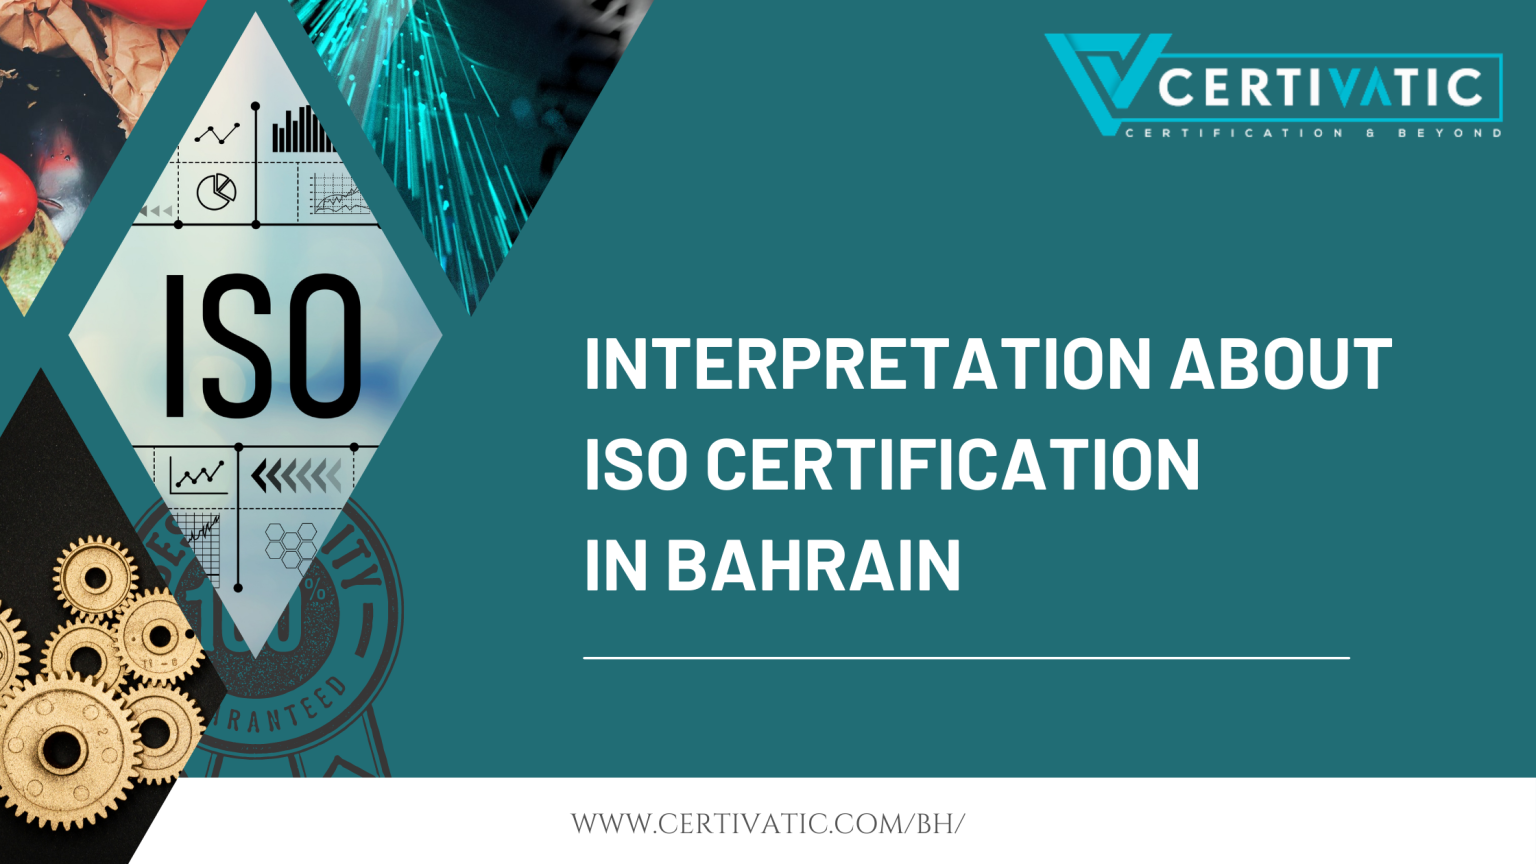 A Brief Interpretation about ISO Certification in Bahrain explained